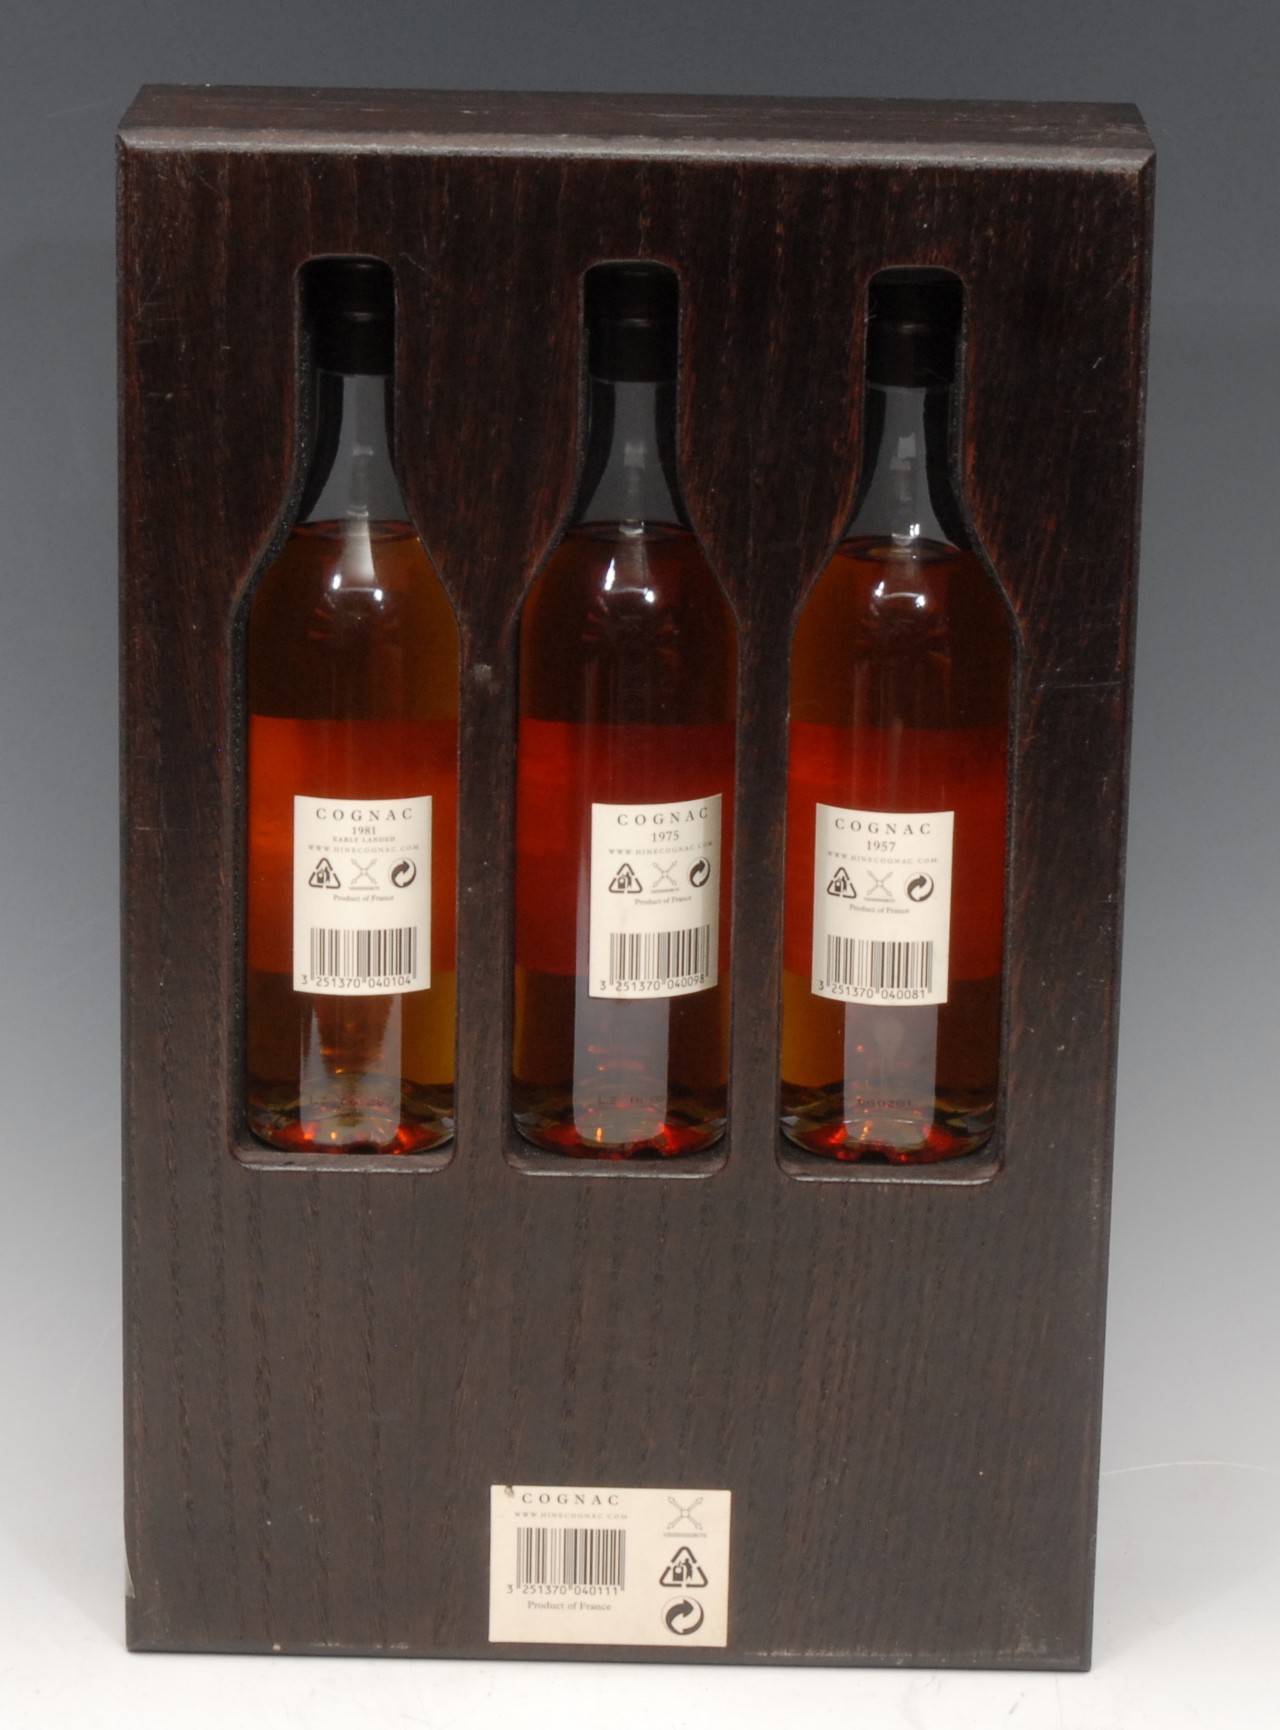 A presentation set of three 20cl bottles, Hine Grand Champagne Cognac, 1957, 1975 and 1981, wooden - Image 2 of 3